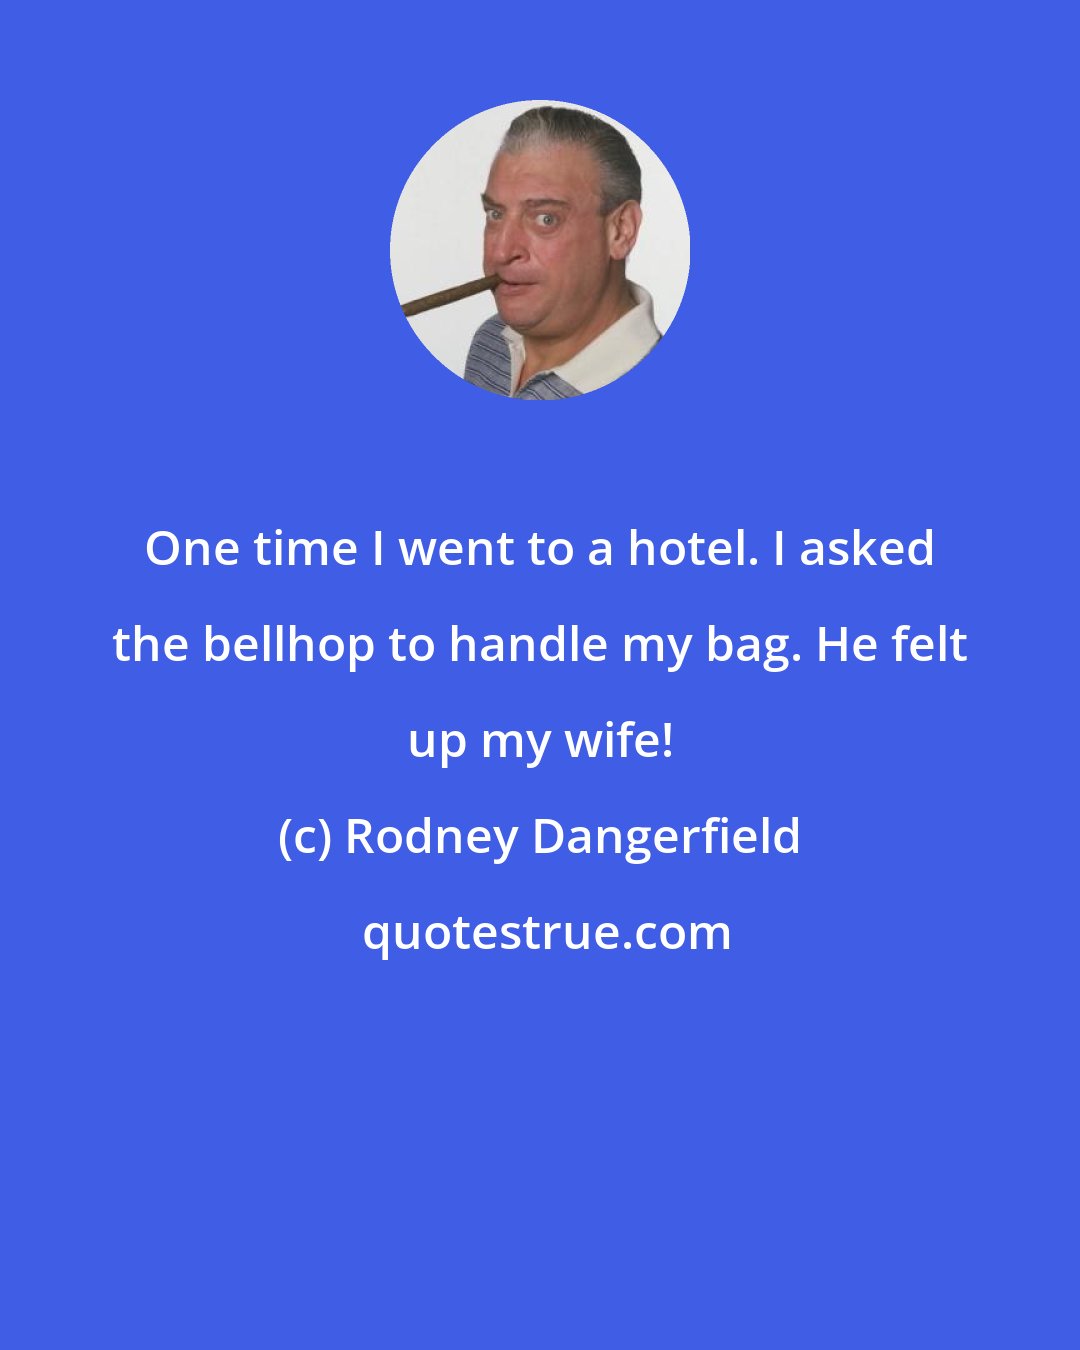 Rodney Dangerfield: One time I went to a hotel. I asked the bellhop to handle my bag. He felt up my wife!